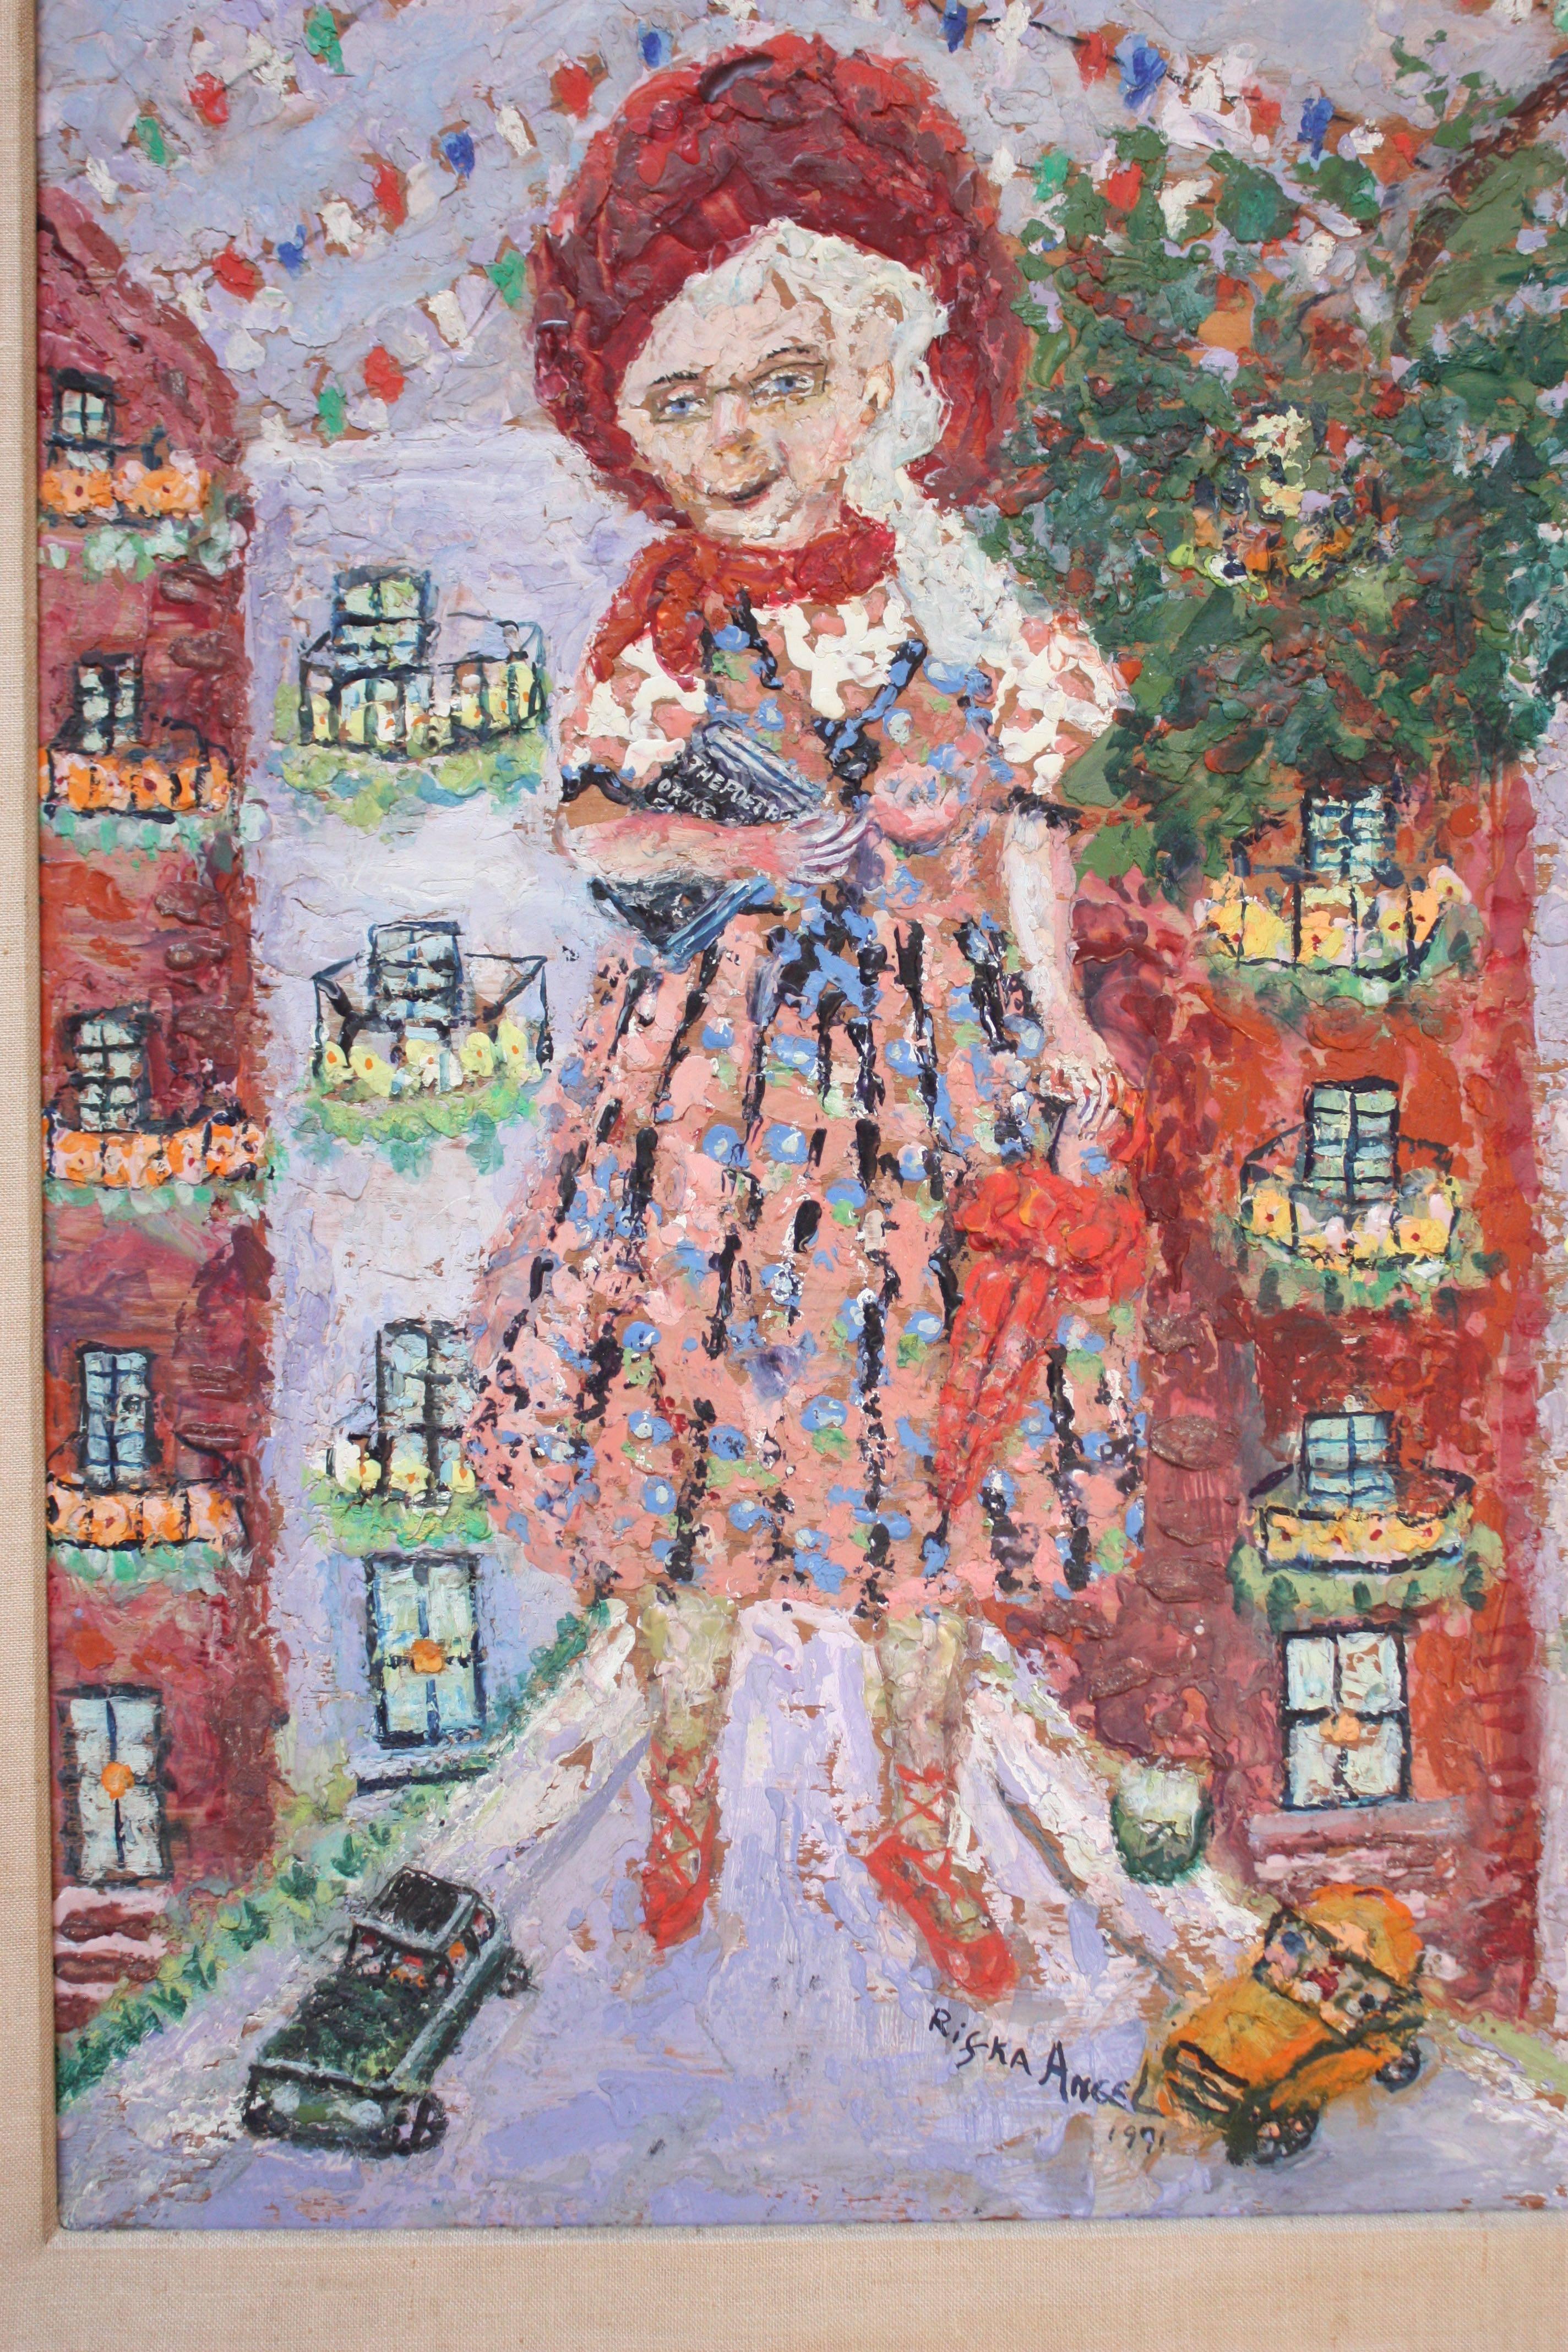 Exceptional encaustic painting by Russian-born artist, Rifka Angel (1899-1988) depicting a giant, old woman towering over New York City (likely Angel in her old age - she lived in New York and Chicago on and off since the age of 15 when she